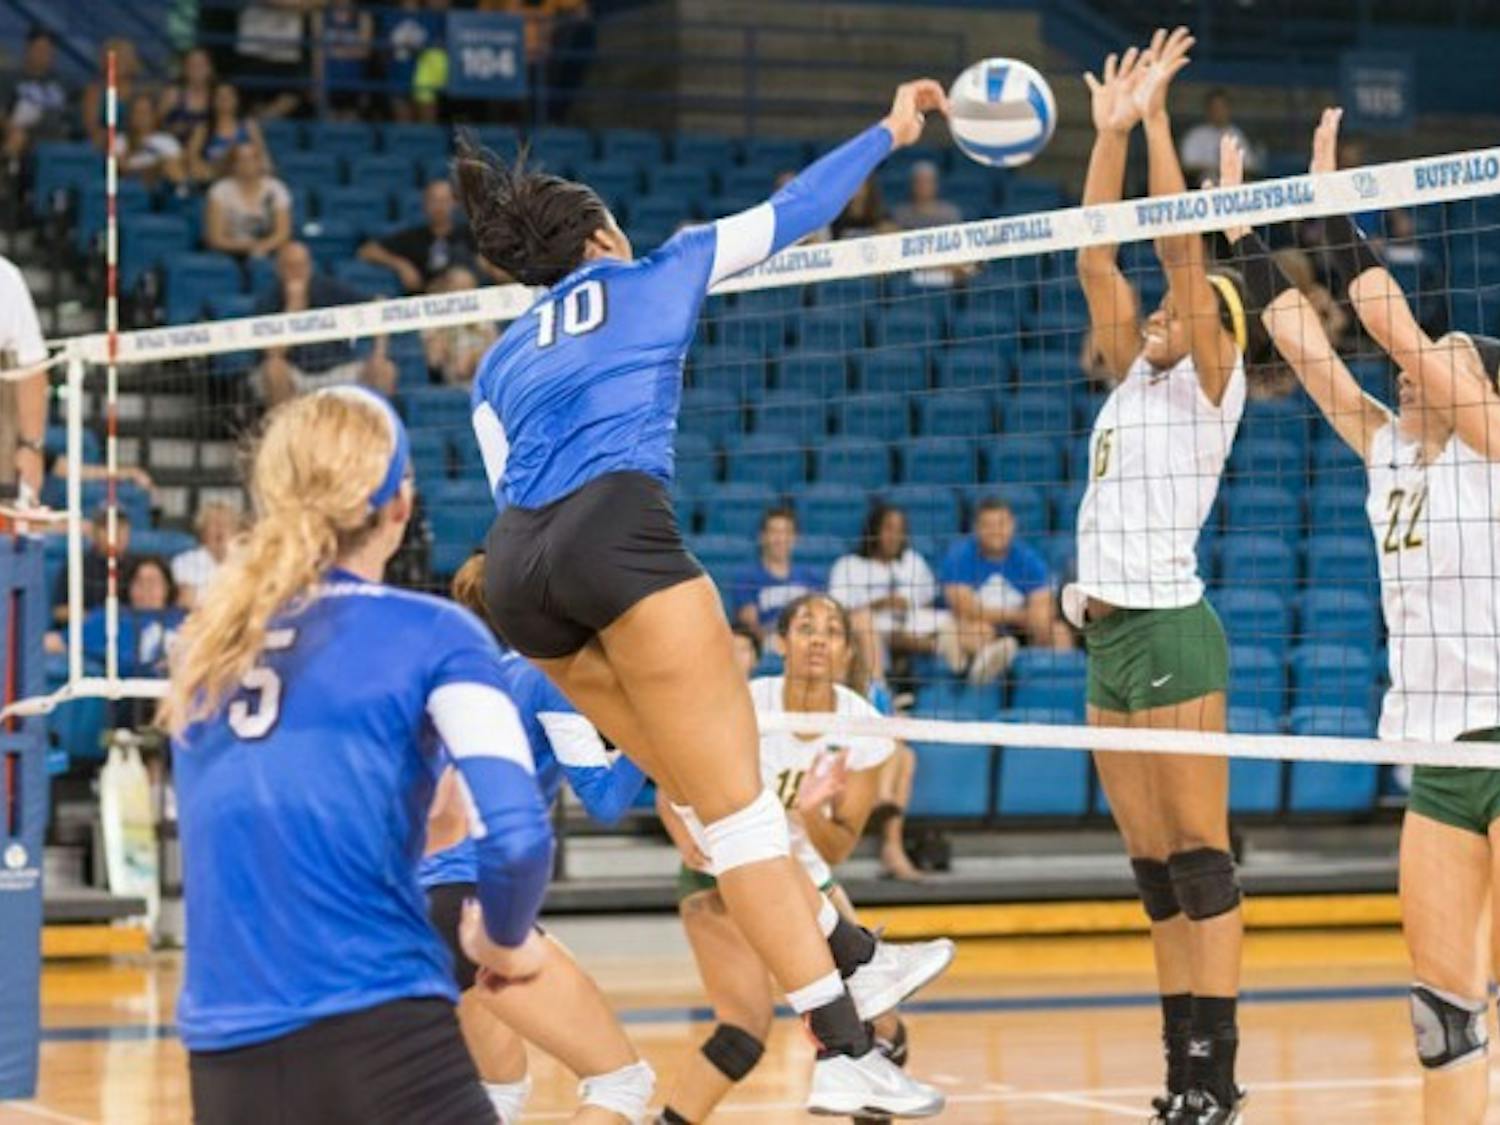 Junior middle blocker Akeila Lain sets up a spike. The volleyball team was perfect in its three games this weekend, going 3-0 to win the UIC Tournament Championship.